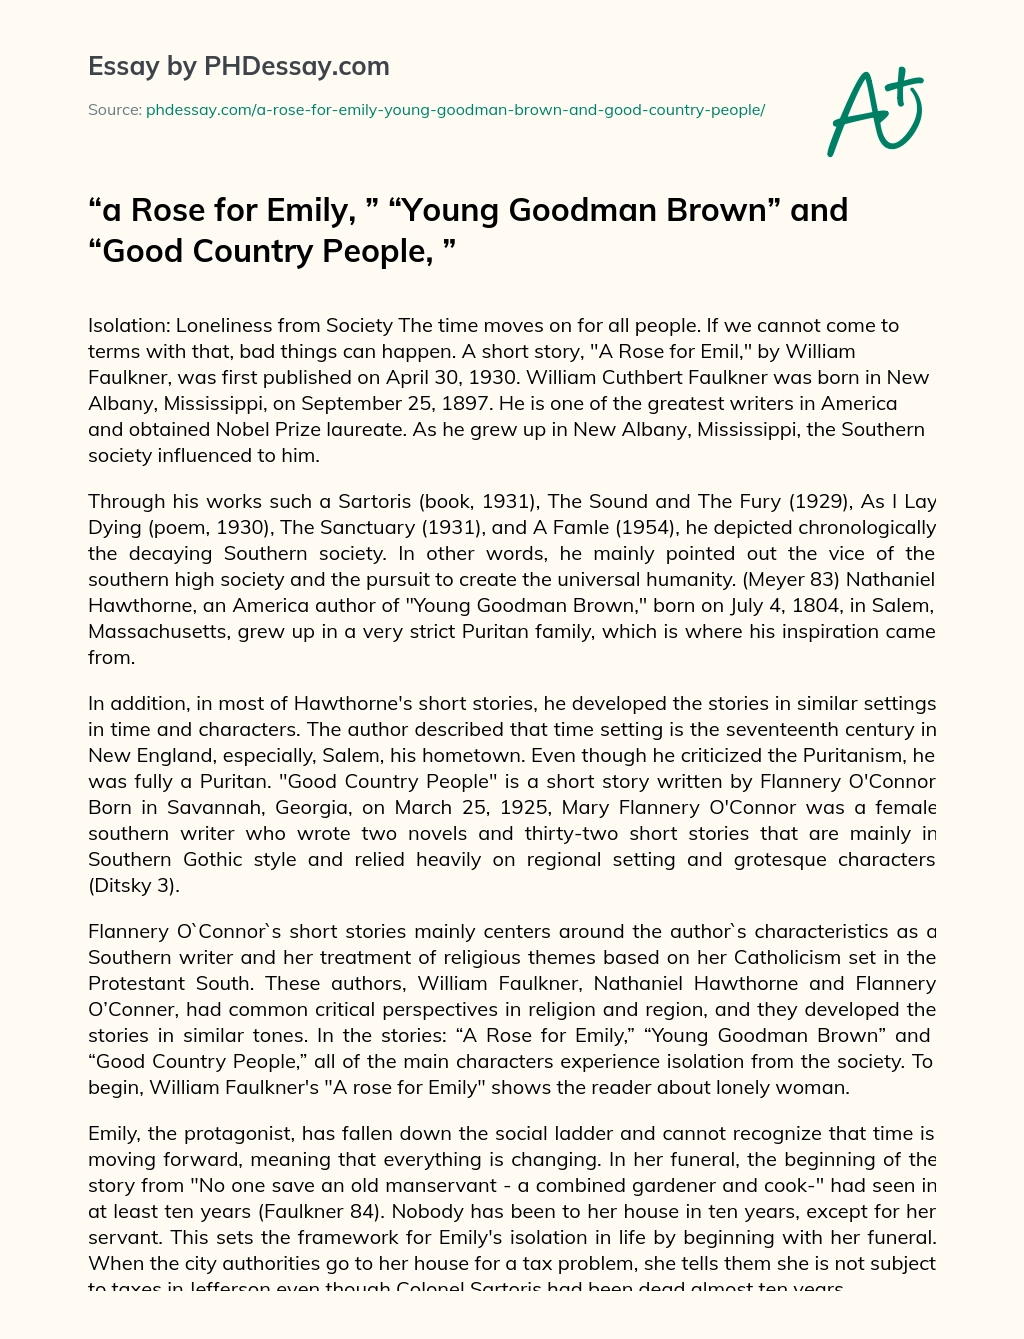 A Rose for Emily and Young Goodman Brown and Good Country People essay